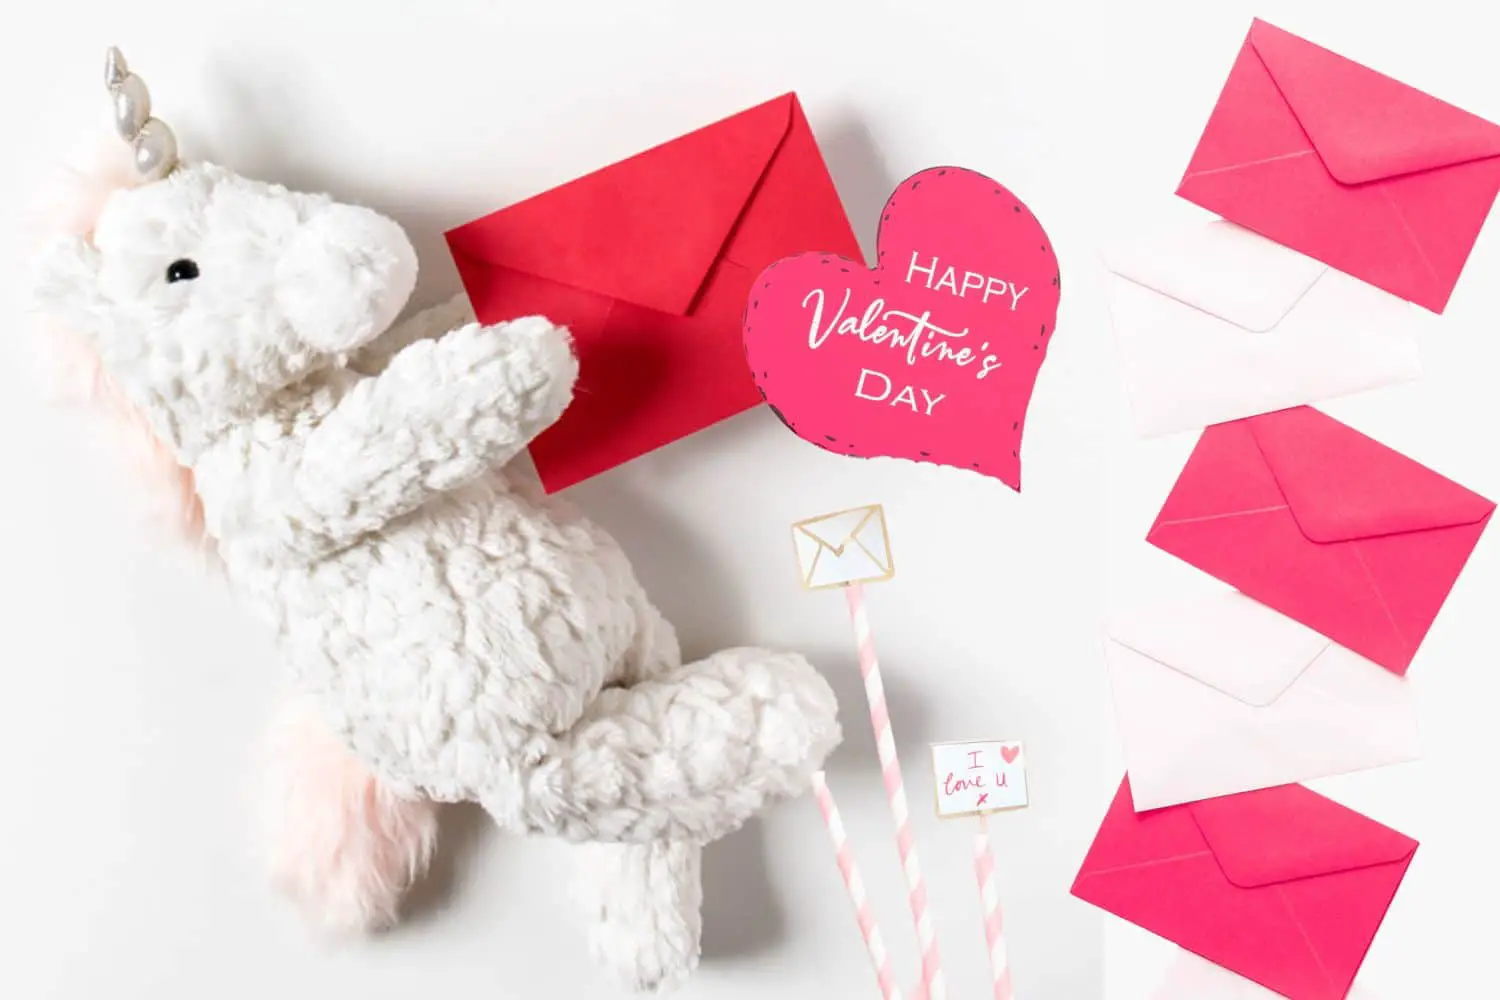 DIY Homemade Valentine’s Day Cards with Candy